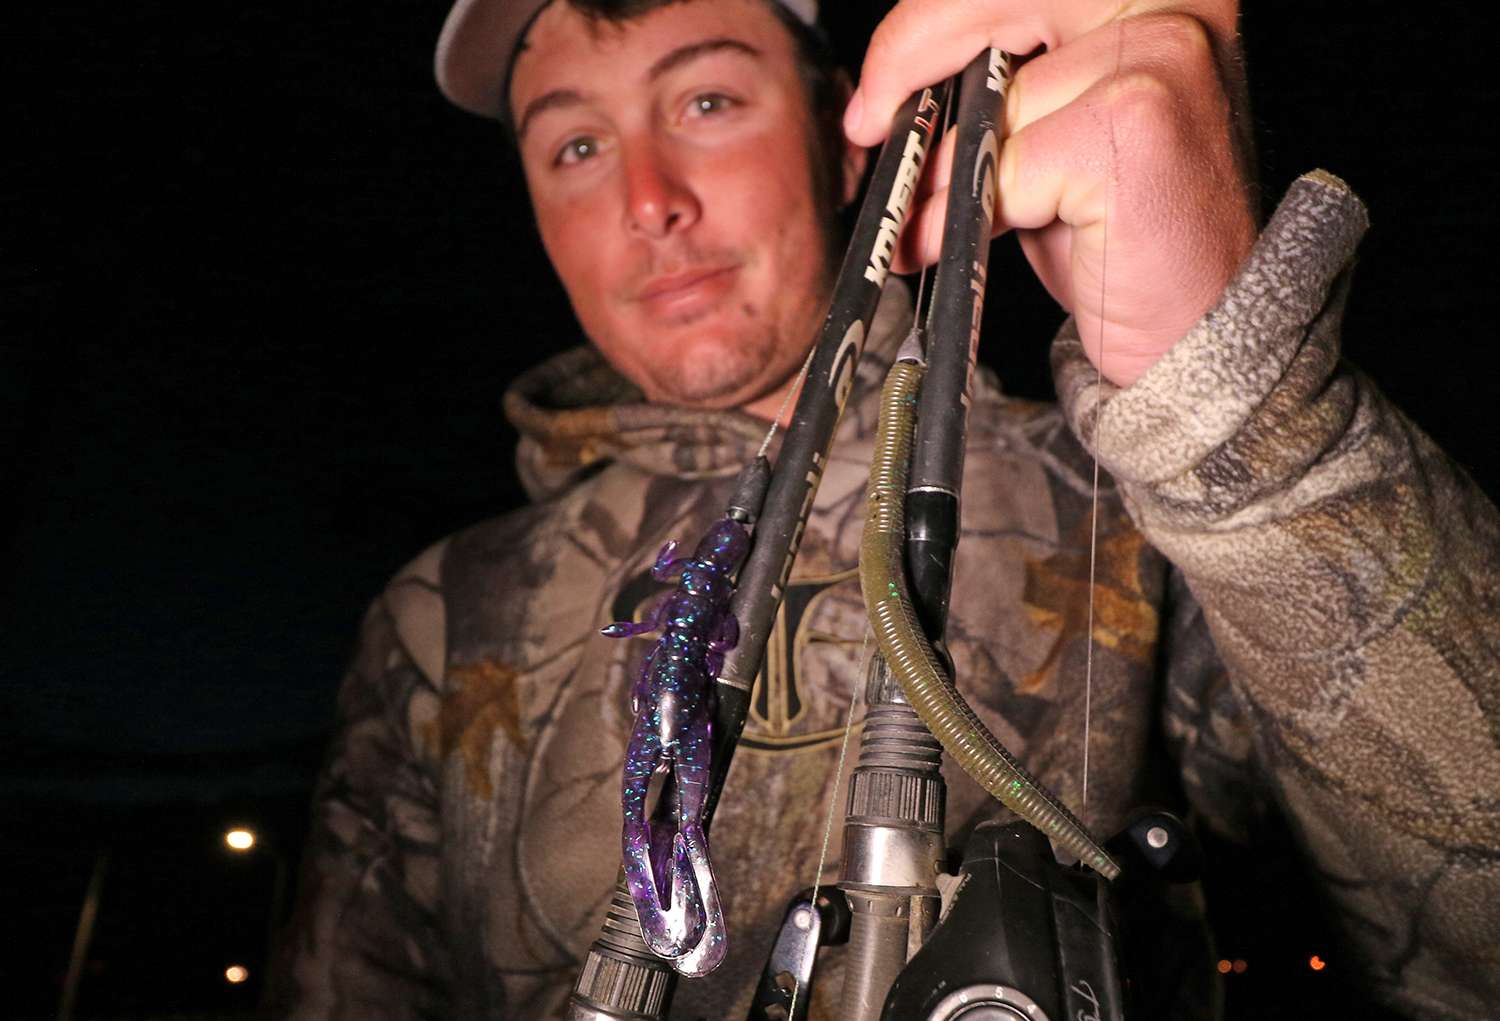 To finish fifth Tyler Rivet used these soft plastic rigs. A 4-inch Mister Twister Buzz Bug Craw with 4/0 Owner 4x Jungle Flippinâ Hook, and 3/8-ounce Eco Pro Tungsten Elite Series Flipping Weight was a choice. So was a 5-inch Yum Dinger with 3/0 Owner 4x Jungle Flippinâ Hook and 1/16-ounce worm weight. 